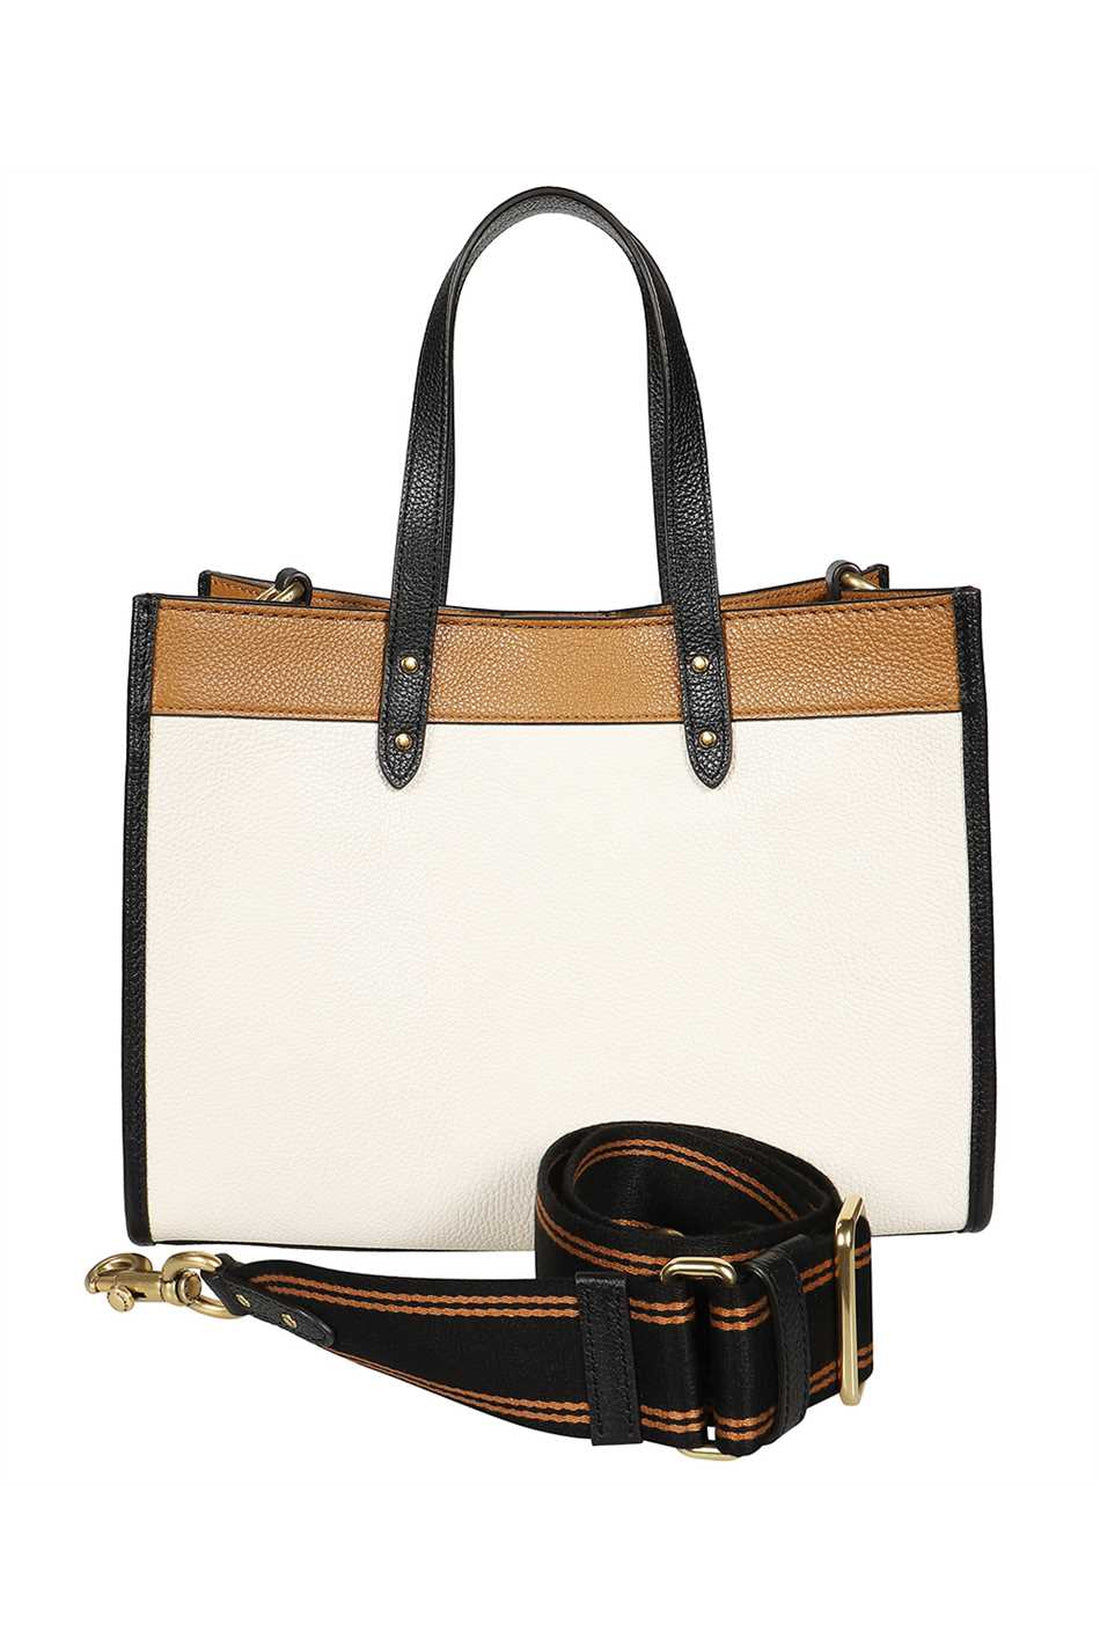 Coach-OUTLET-SALE-Field 30 leather tote-ARCHIVIST